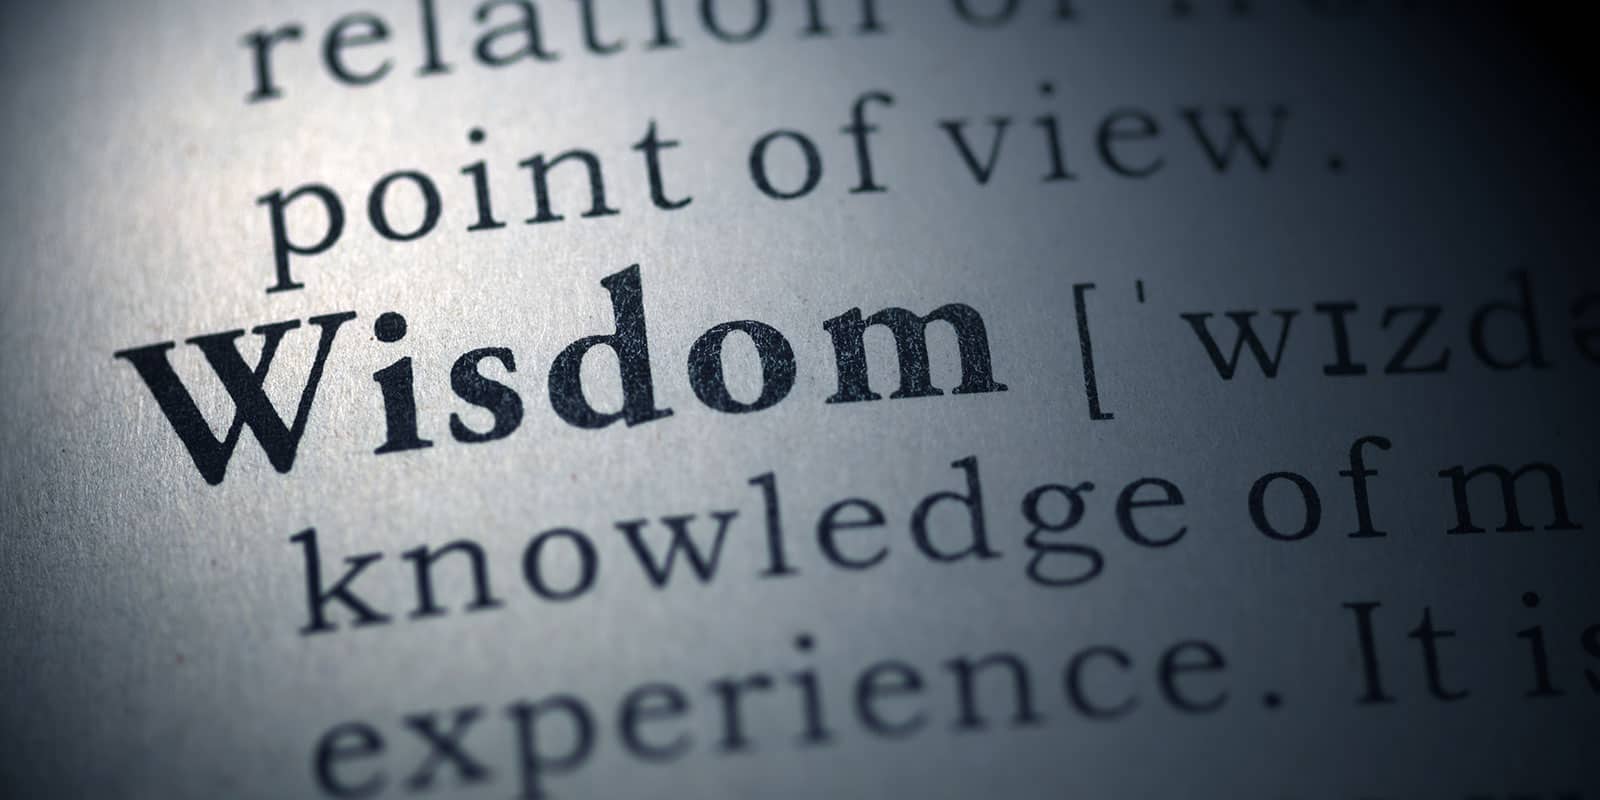 A picture close-up of the word "Wisdom" in the dictionary